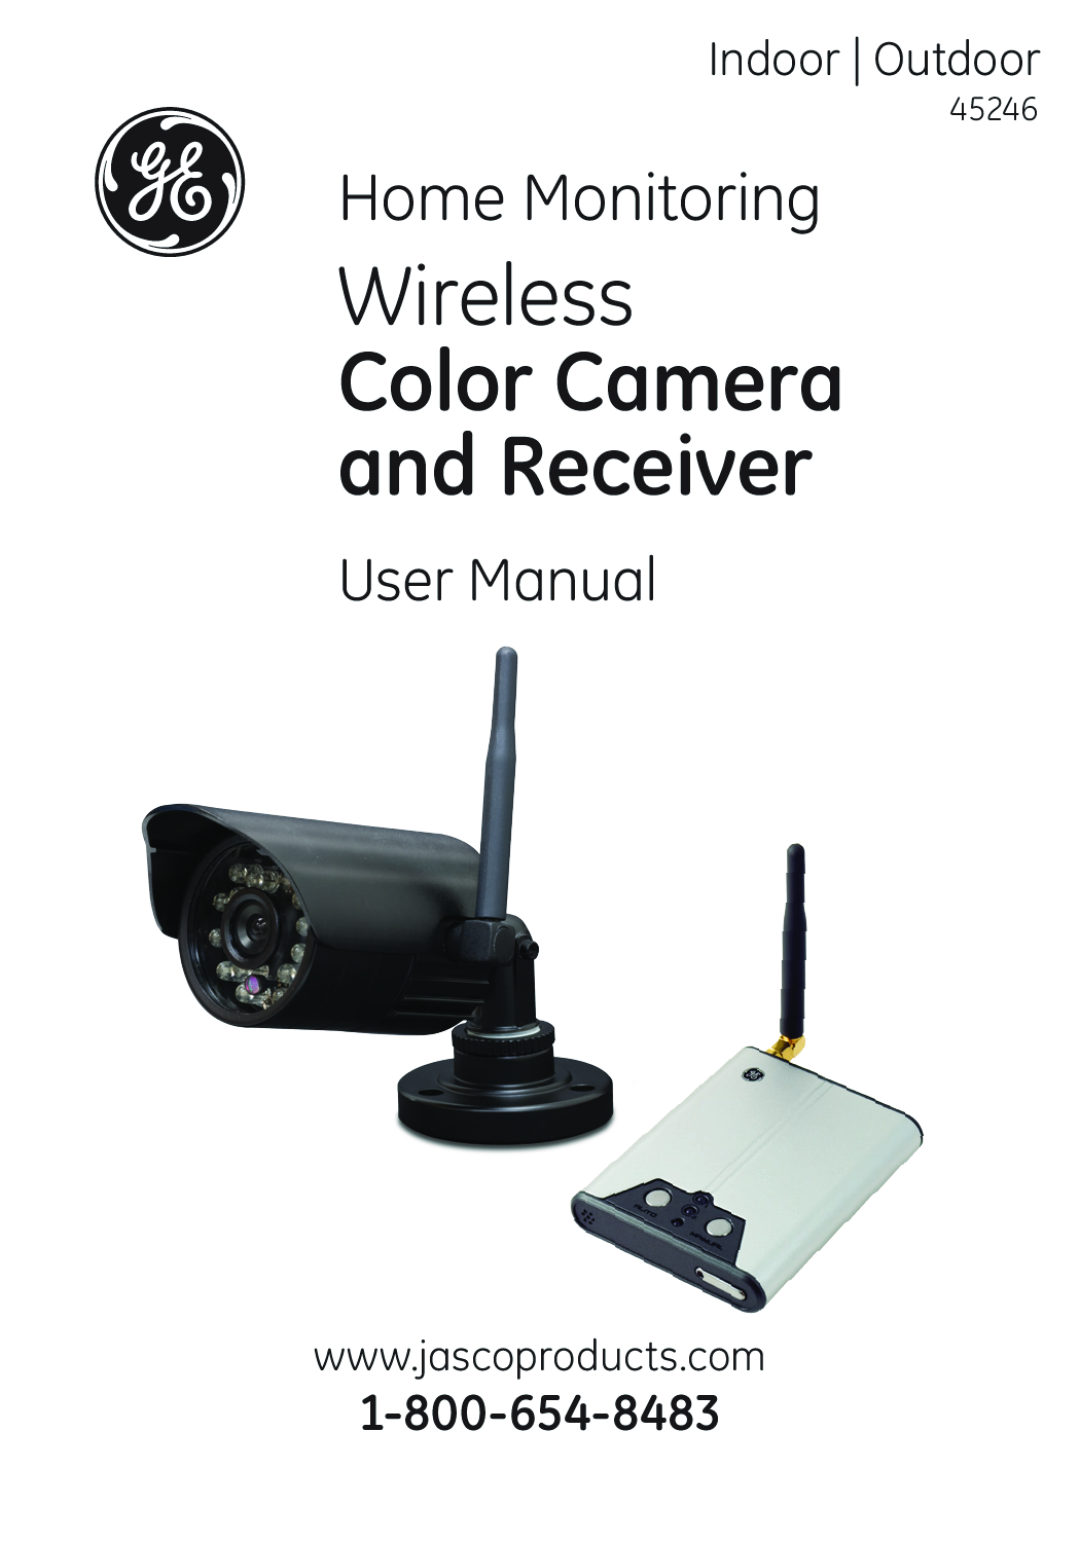 Jasco 45246 user manual Wireless, Color Camera and Receiver, Home Monitoring, Indoor Outdoor 